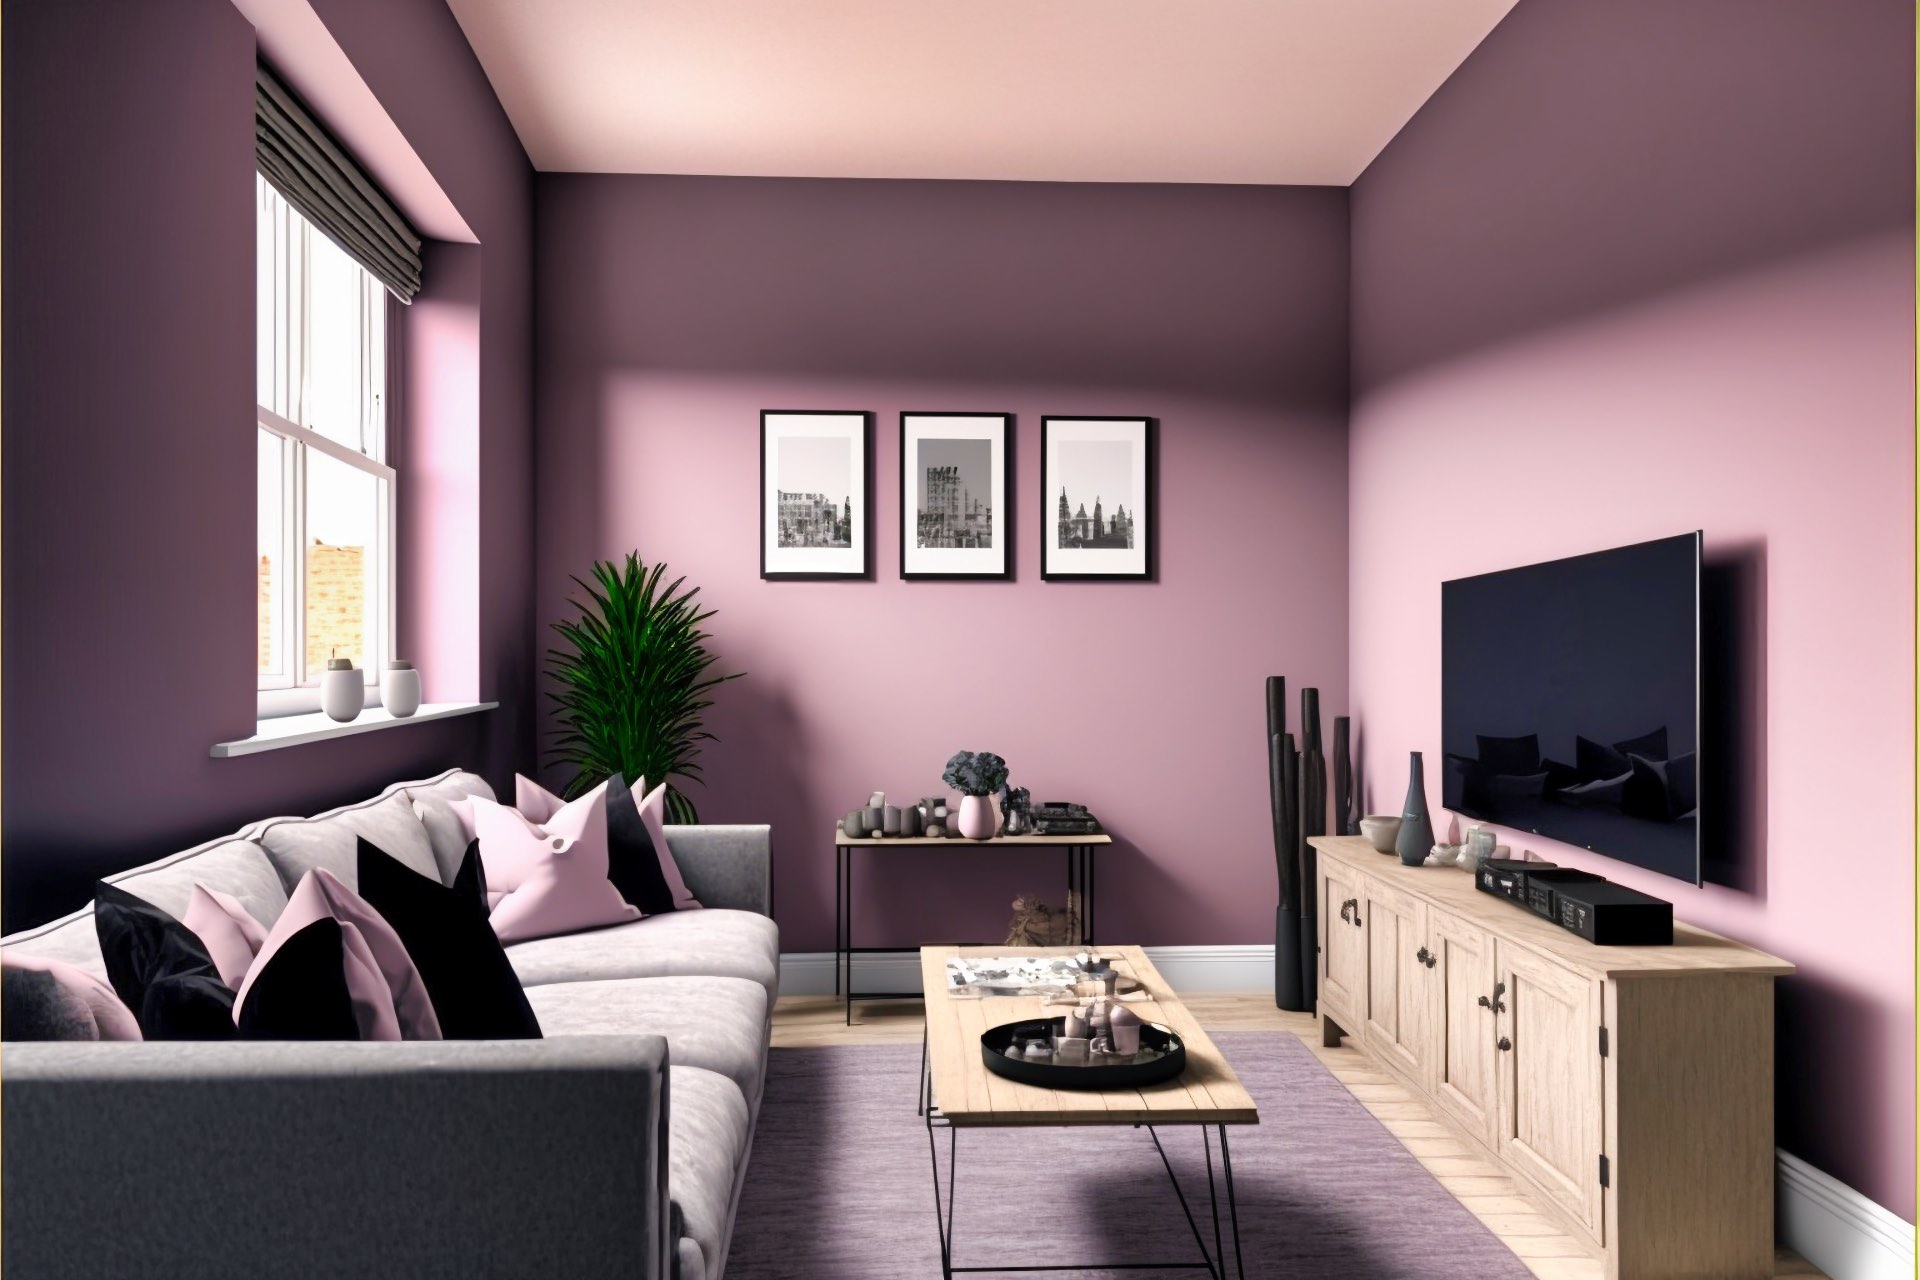 Lavender Walls Grey Accents A Simple Yet Stylish Living Room